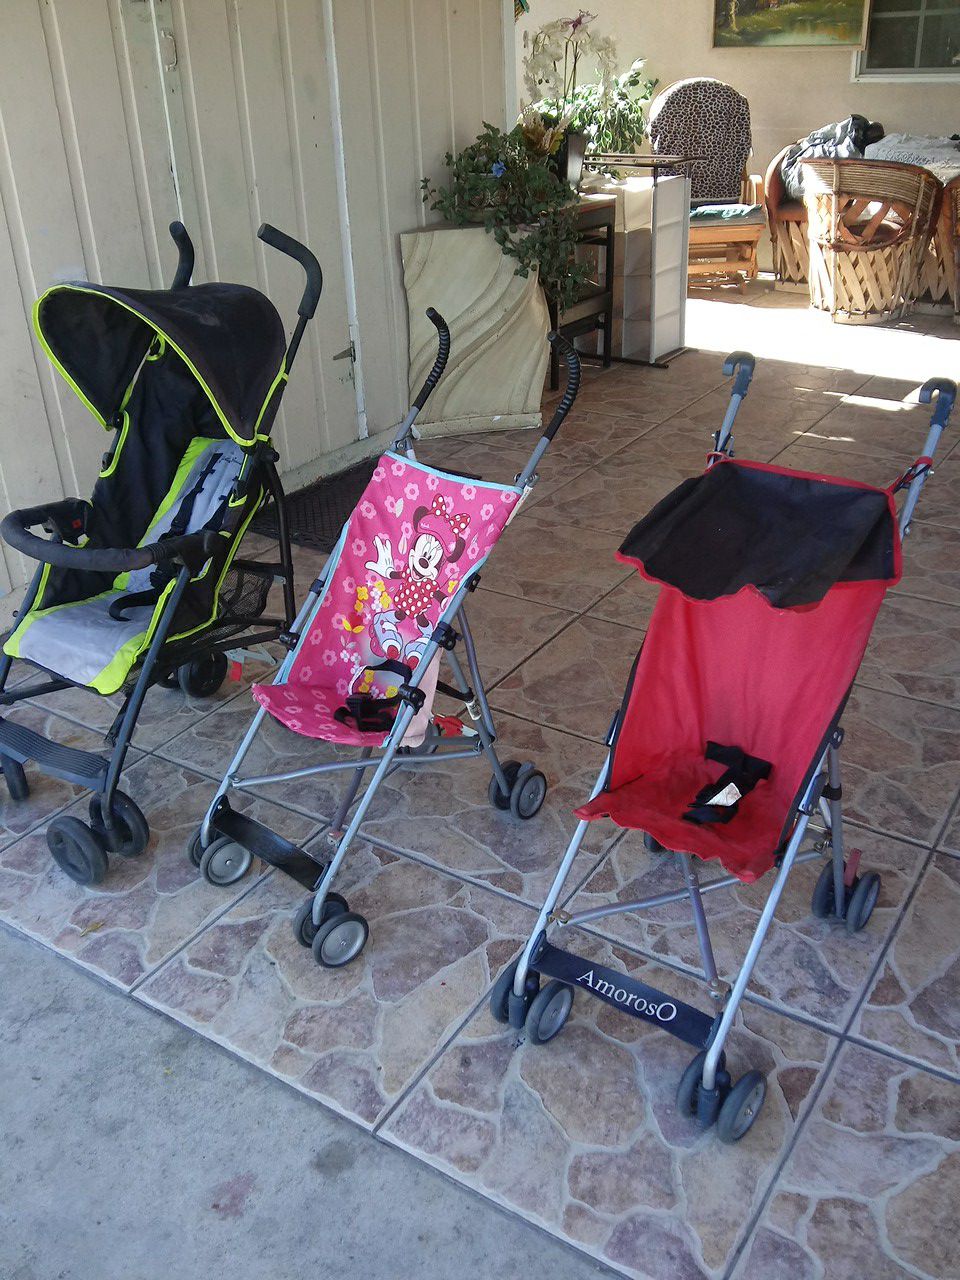 All strollers for 20 good condition